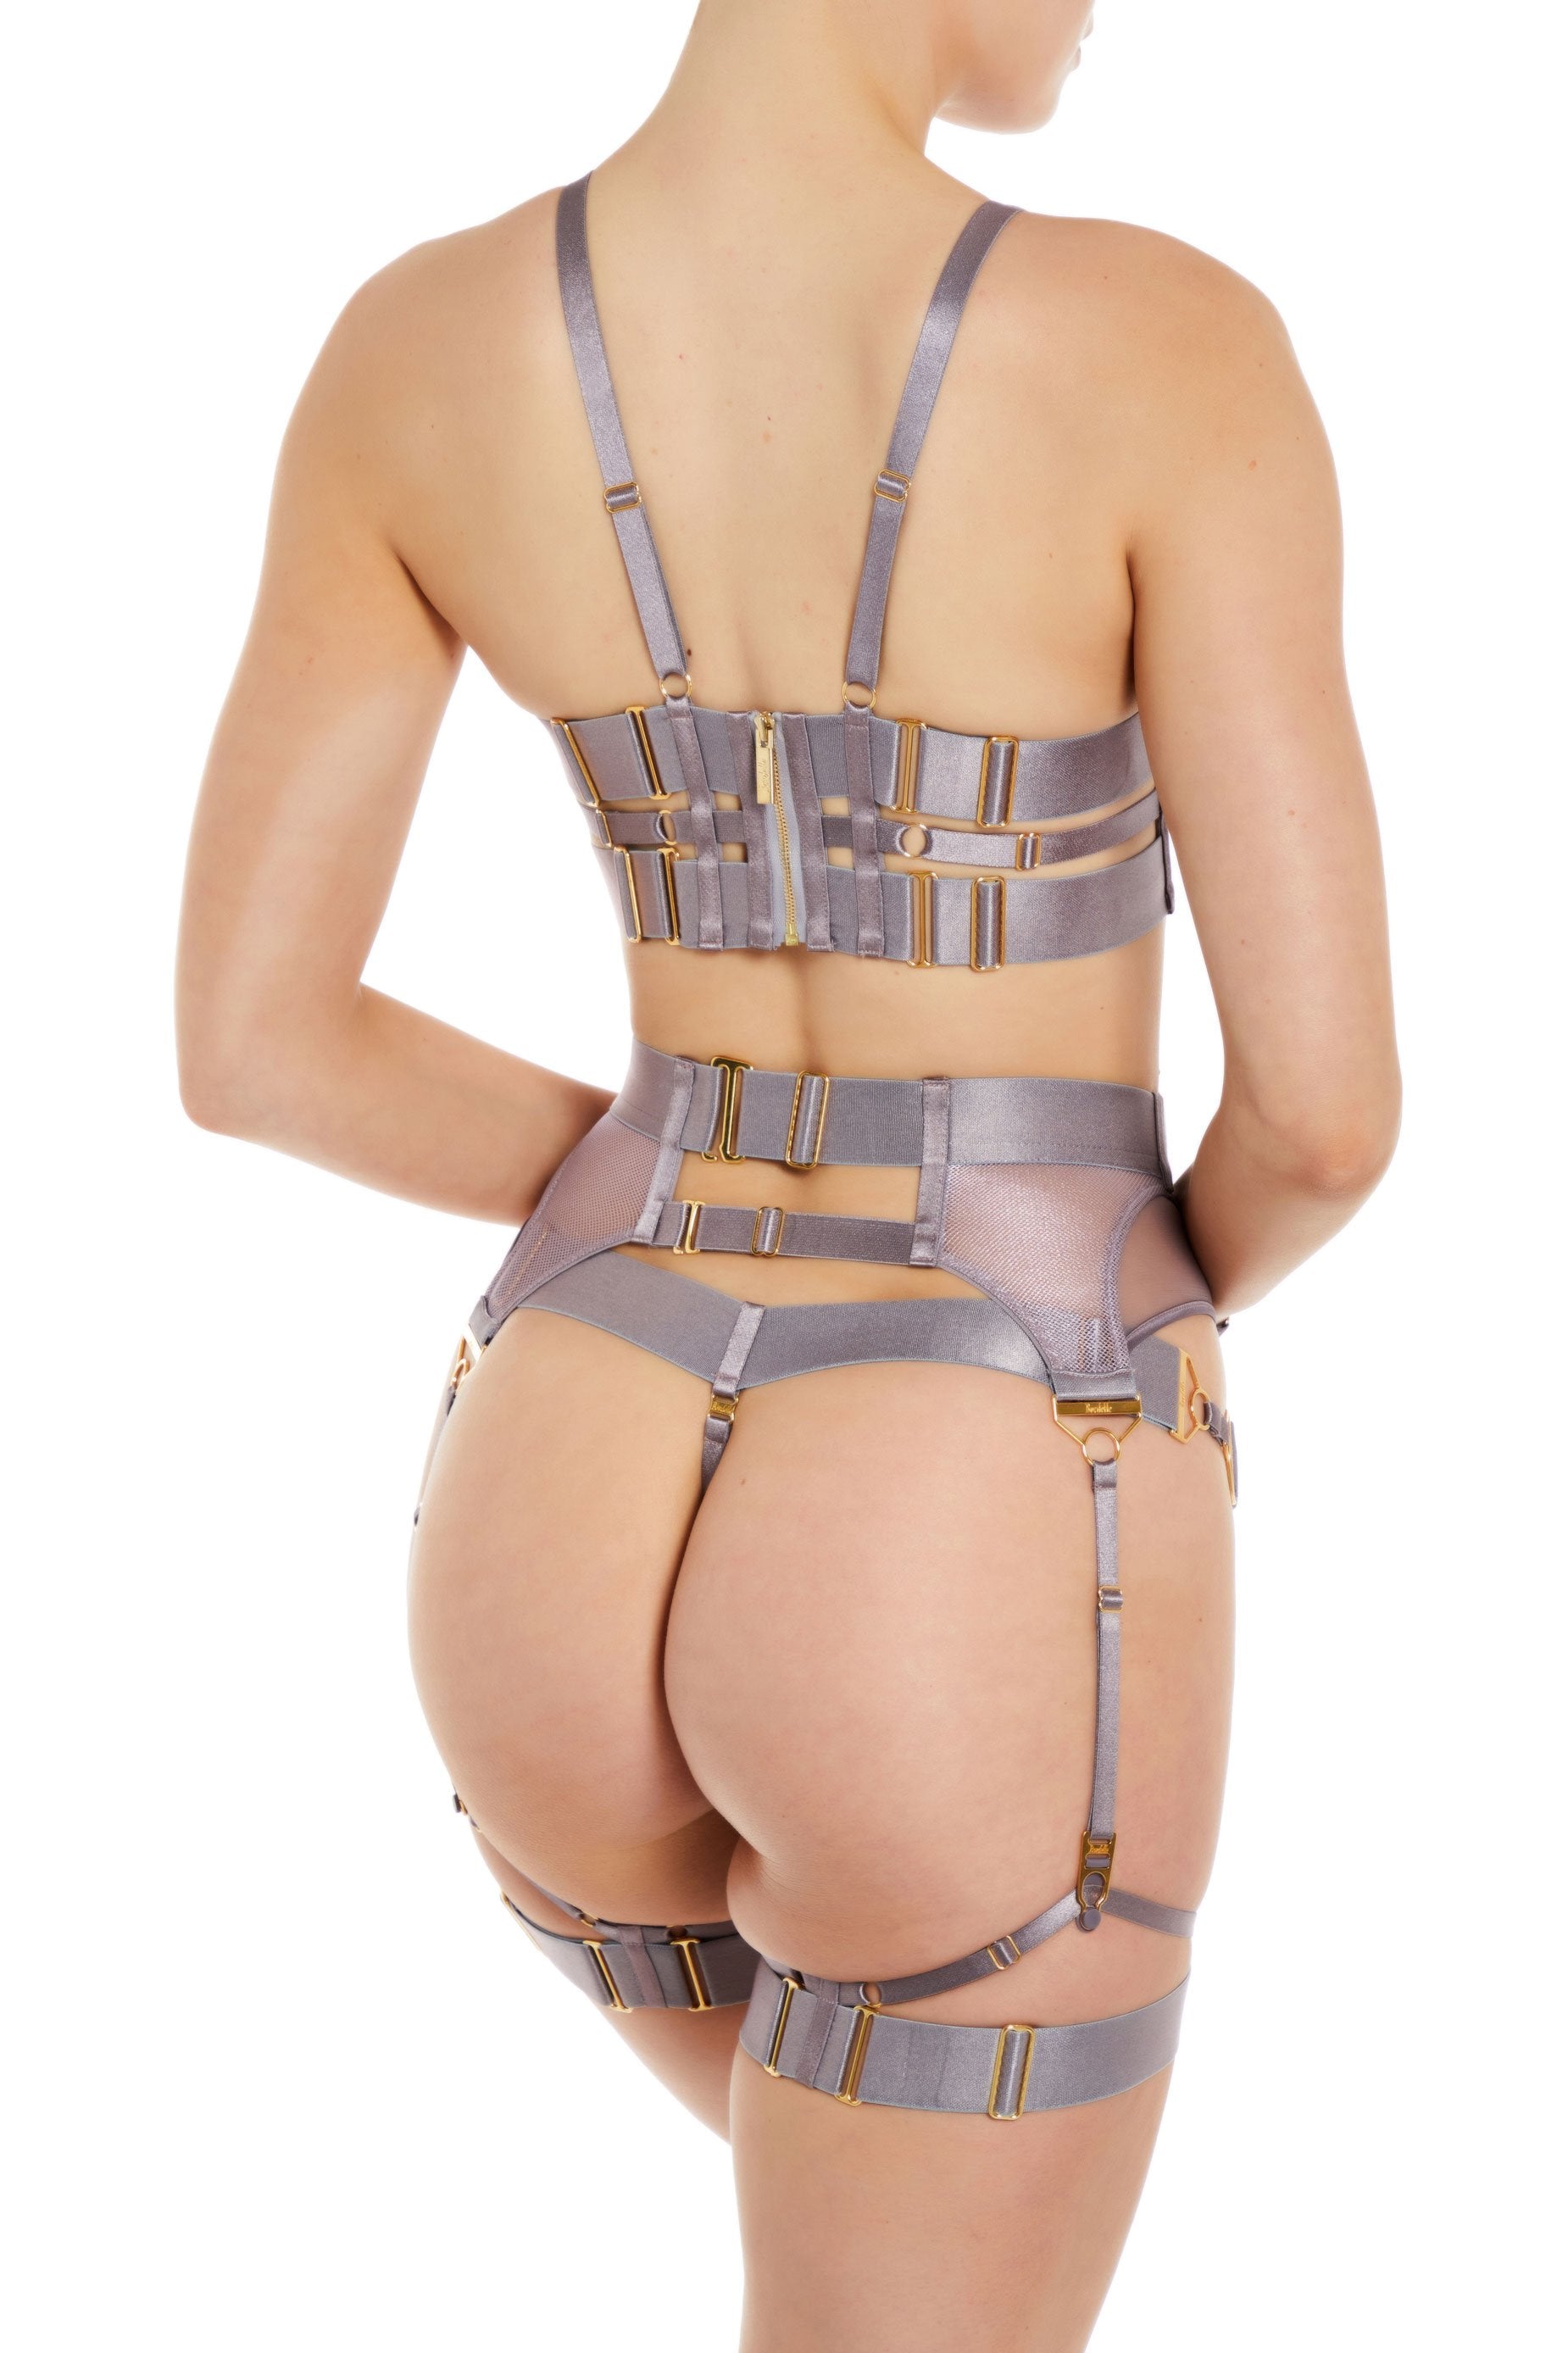 Bordelle Ula suspender and Ula bodice bra and Ula thong tundra violet foiled sheer mesh and grid mesh statement garter belt with four straps and large 24k gold plated o ring detail at front - back view 